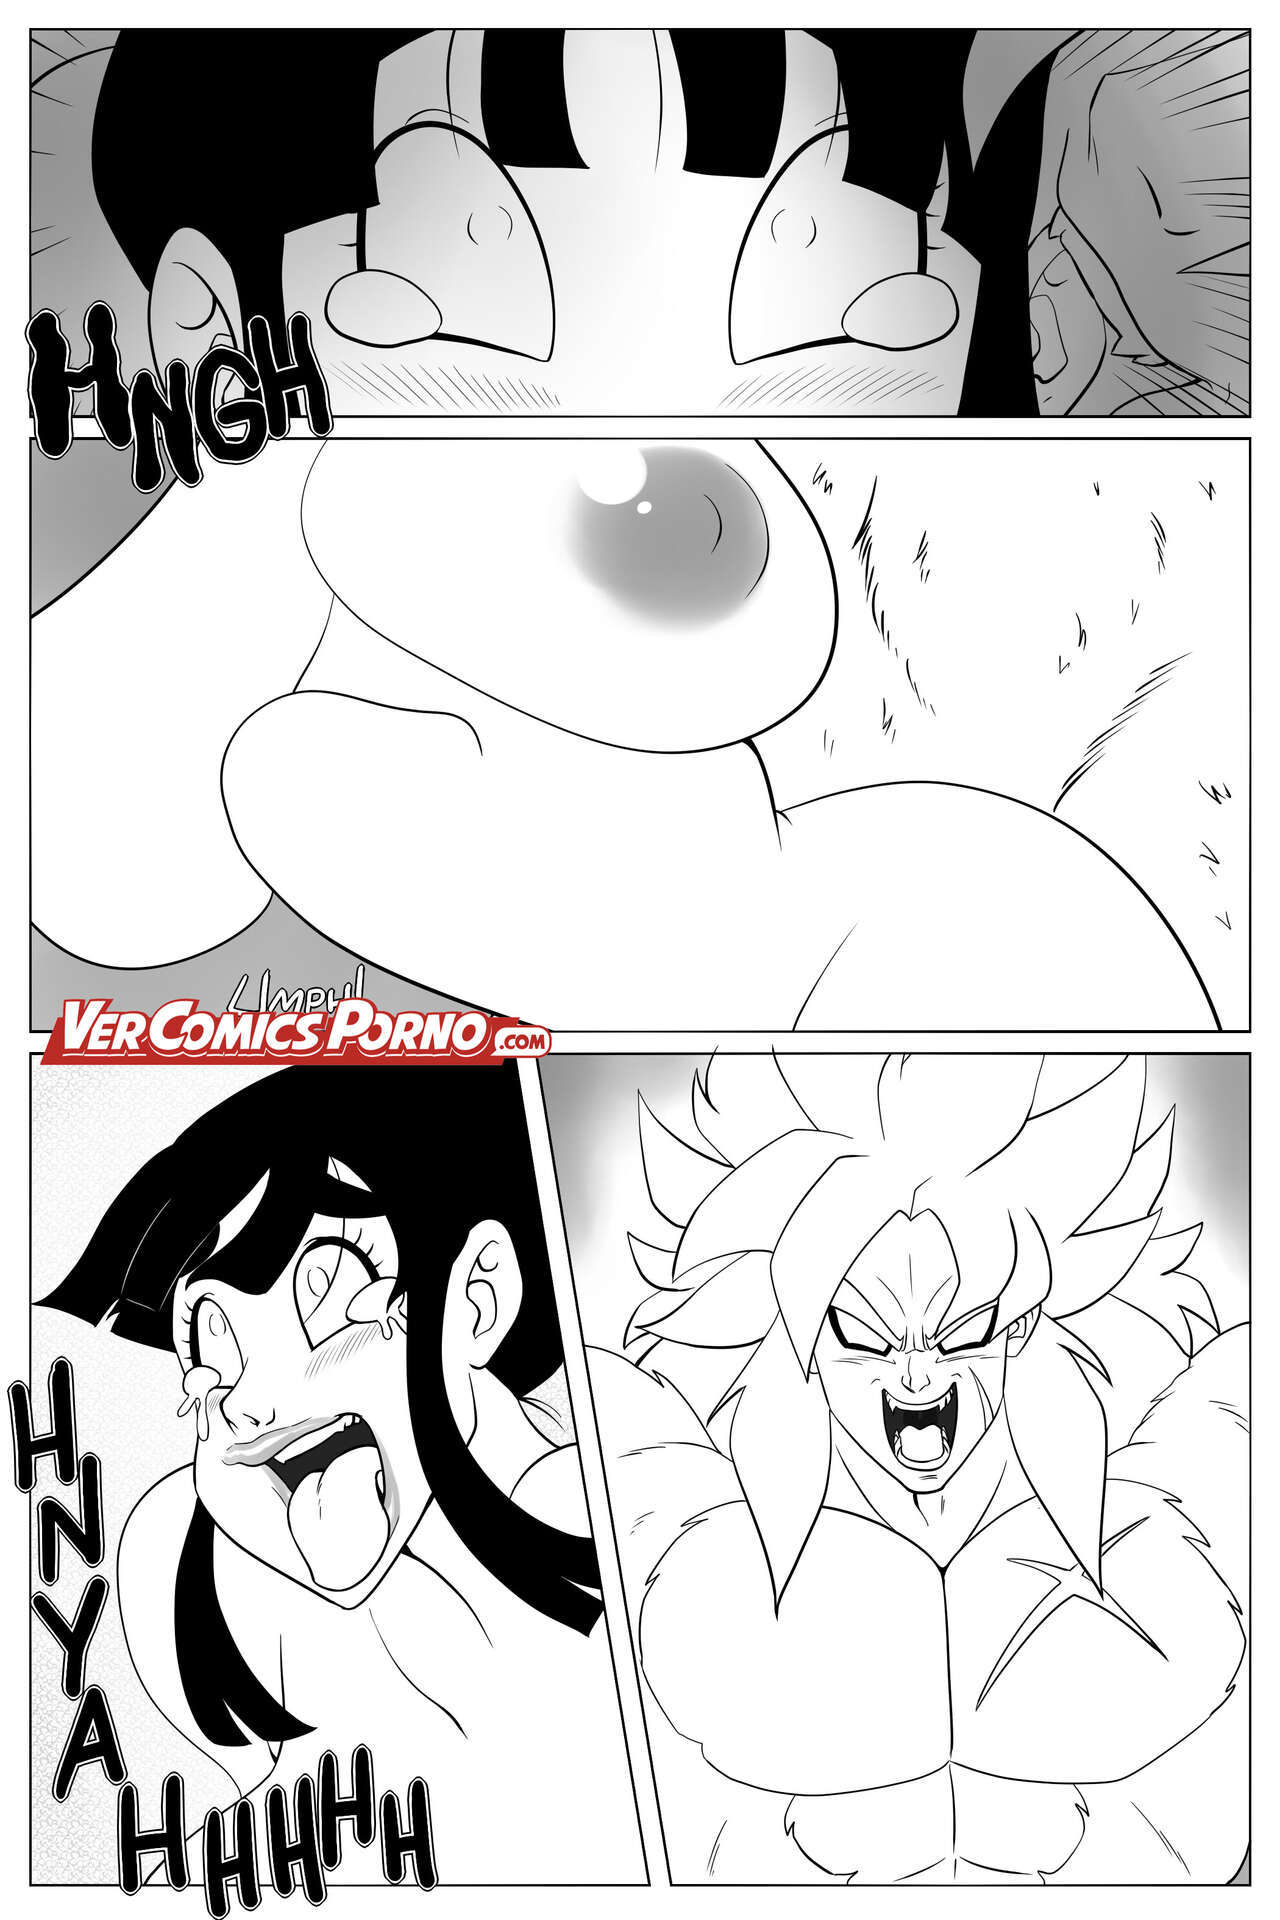 [Pranky] Almighty Broly Ch. 1-2 (Dragon Ball Super) (Spanish)